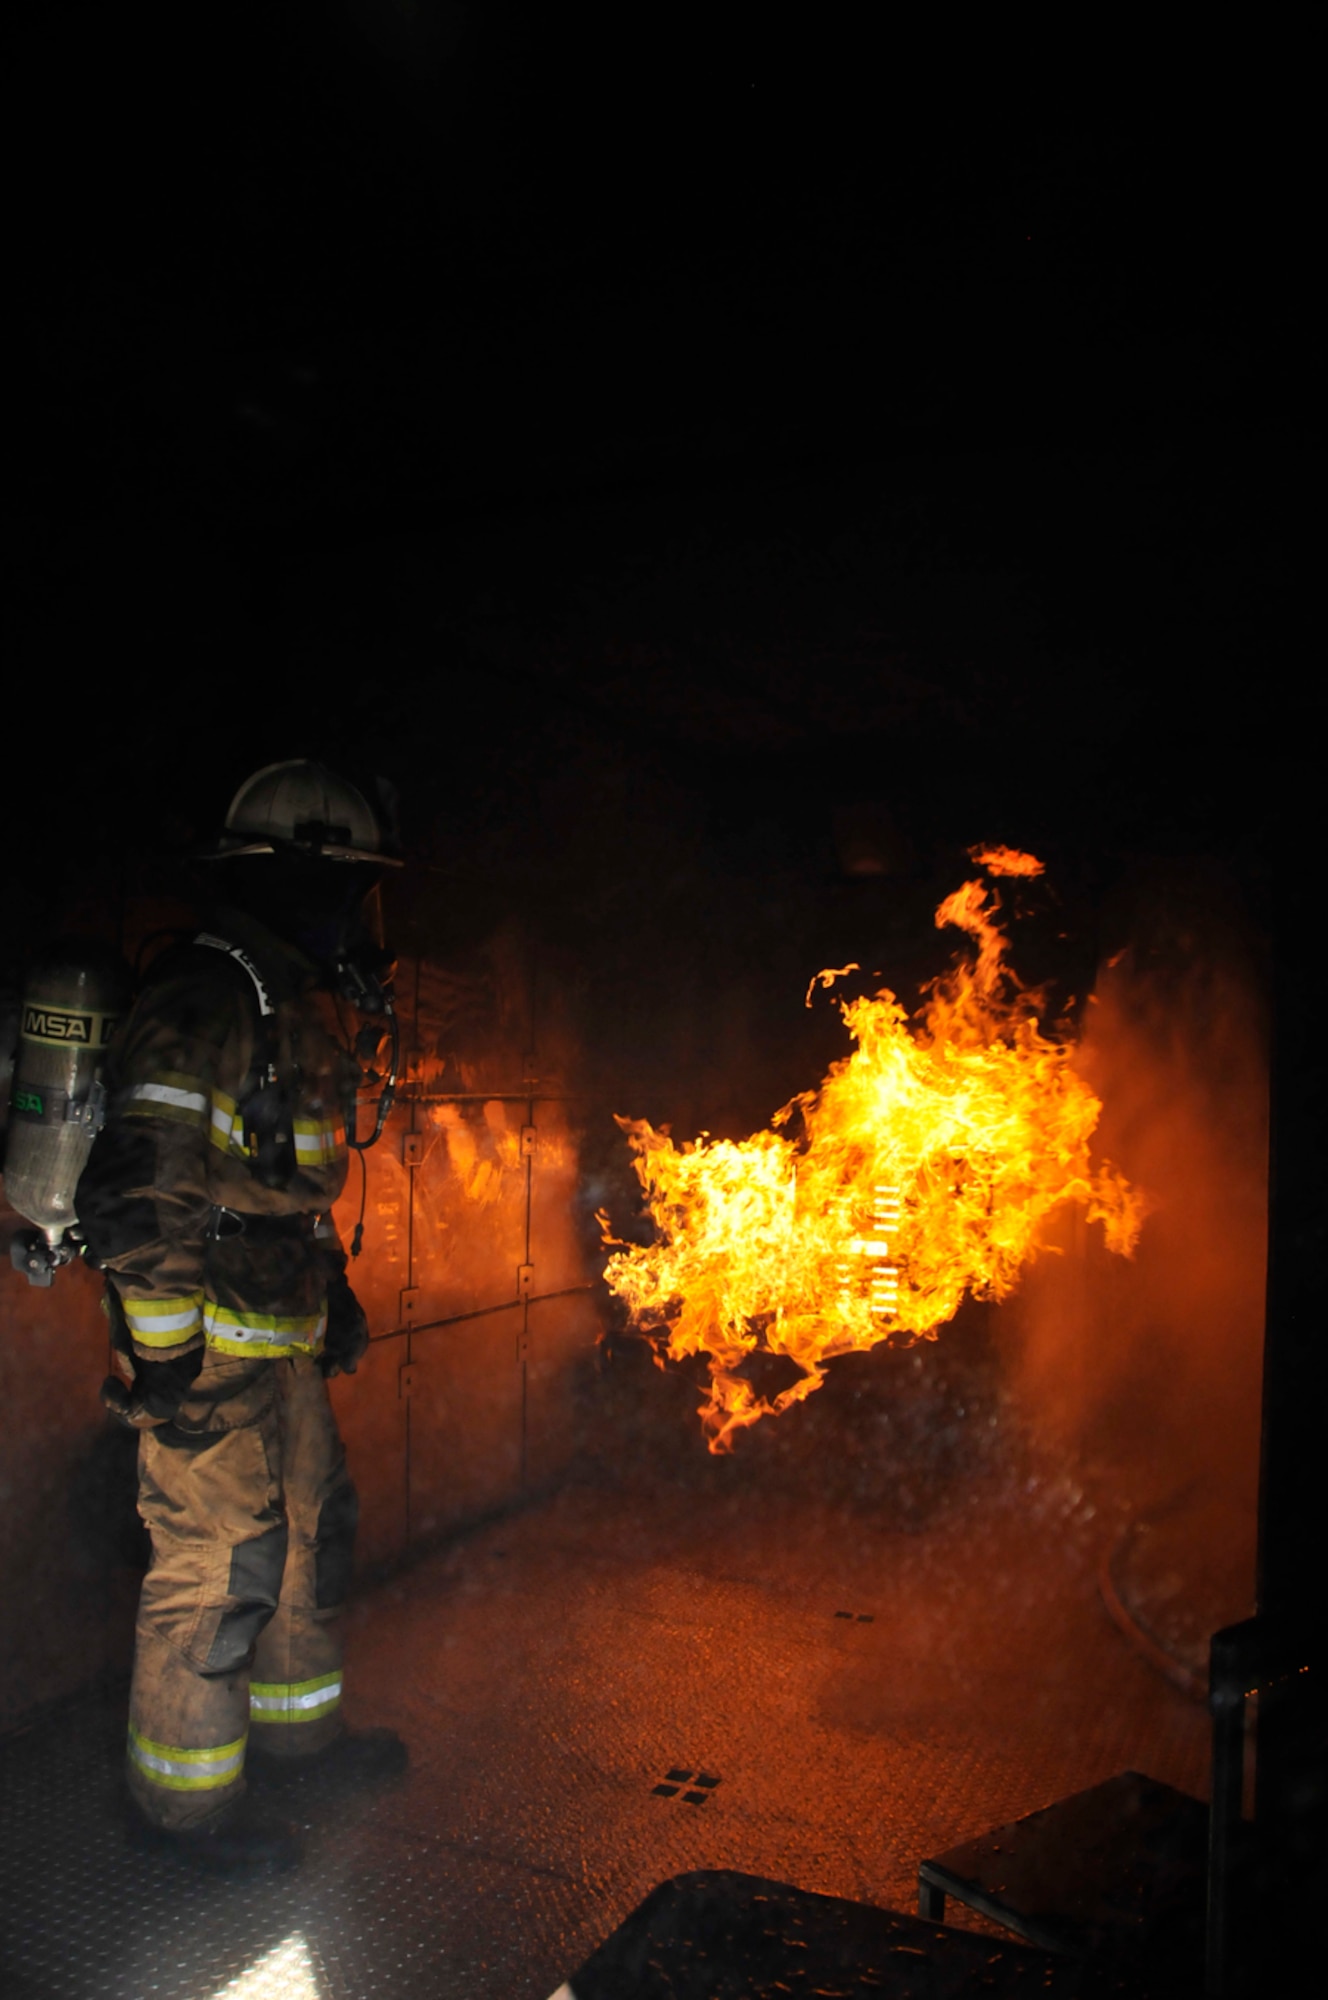 An AEDC firefighter monitors a fire in the bottom floor of West Virginia University Fire Service Extension’s training trailer as his crewmates come down from the second floor of the unit. Two floors of the trailer allows firefighters to simulate going up stairs into attics and into basements to battle fires. (Photo by Rick Goodfriend)